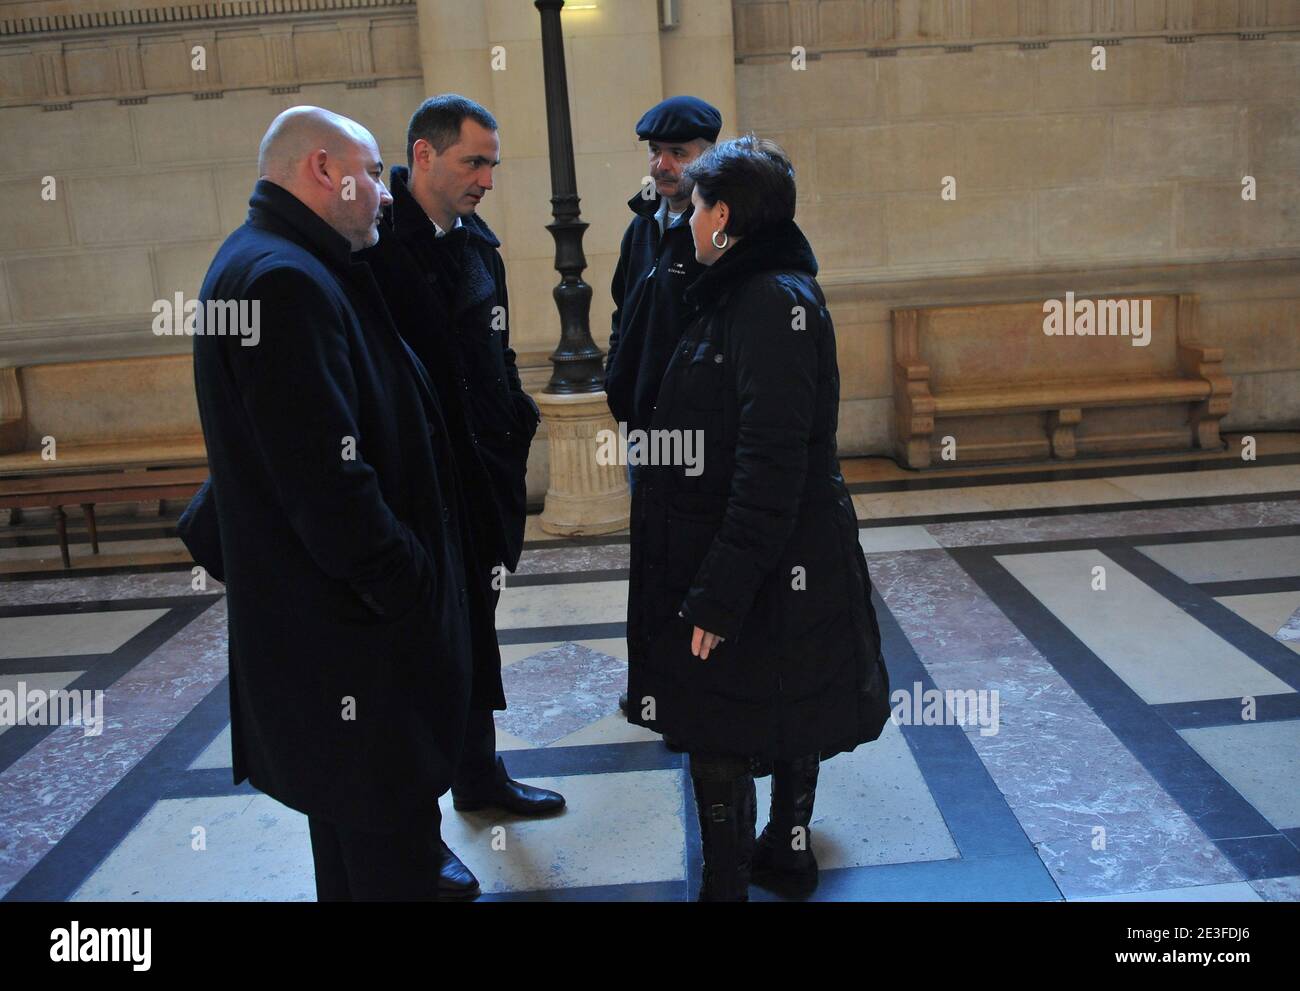 Yvan Colonna's laywers Pascal Garbarini and Gilles Simeoni speak with Christine Colonna, Yvan Colonna's sister and Stephane Colonna, Yvan Colonna's brother at the Paris courthouse to attend the Yvan Colonna Trial, in Paris, France, on March 6, 2009. Photo by Mousse/ABACAPRESS.COM Stock Photo